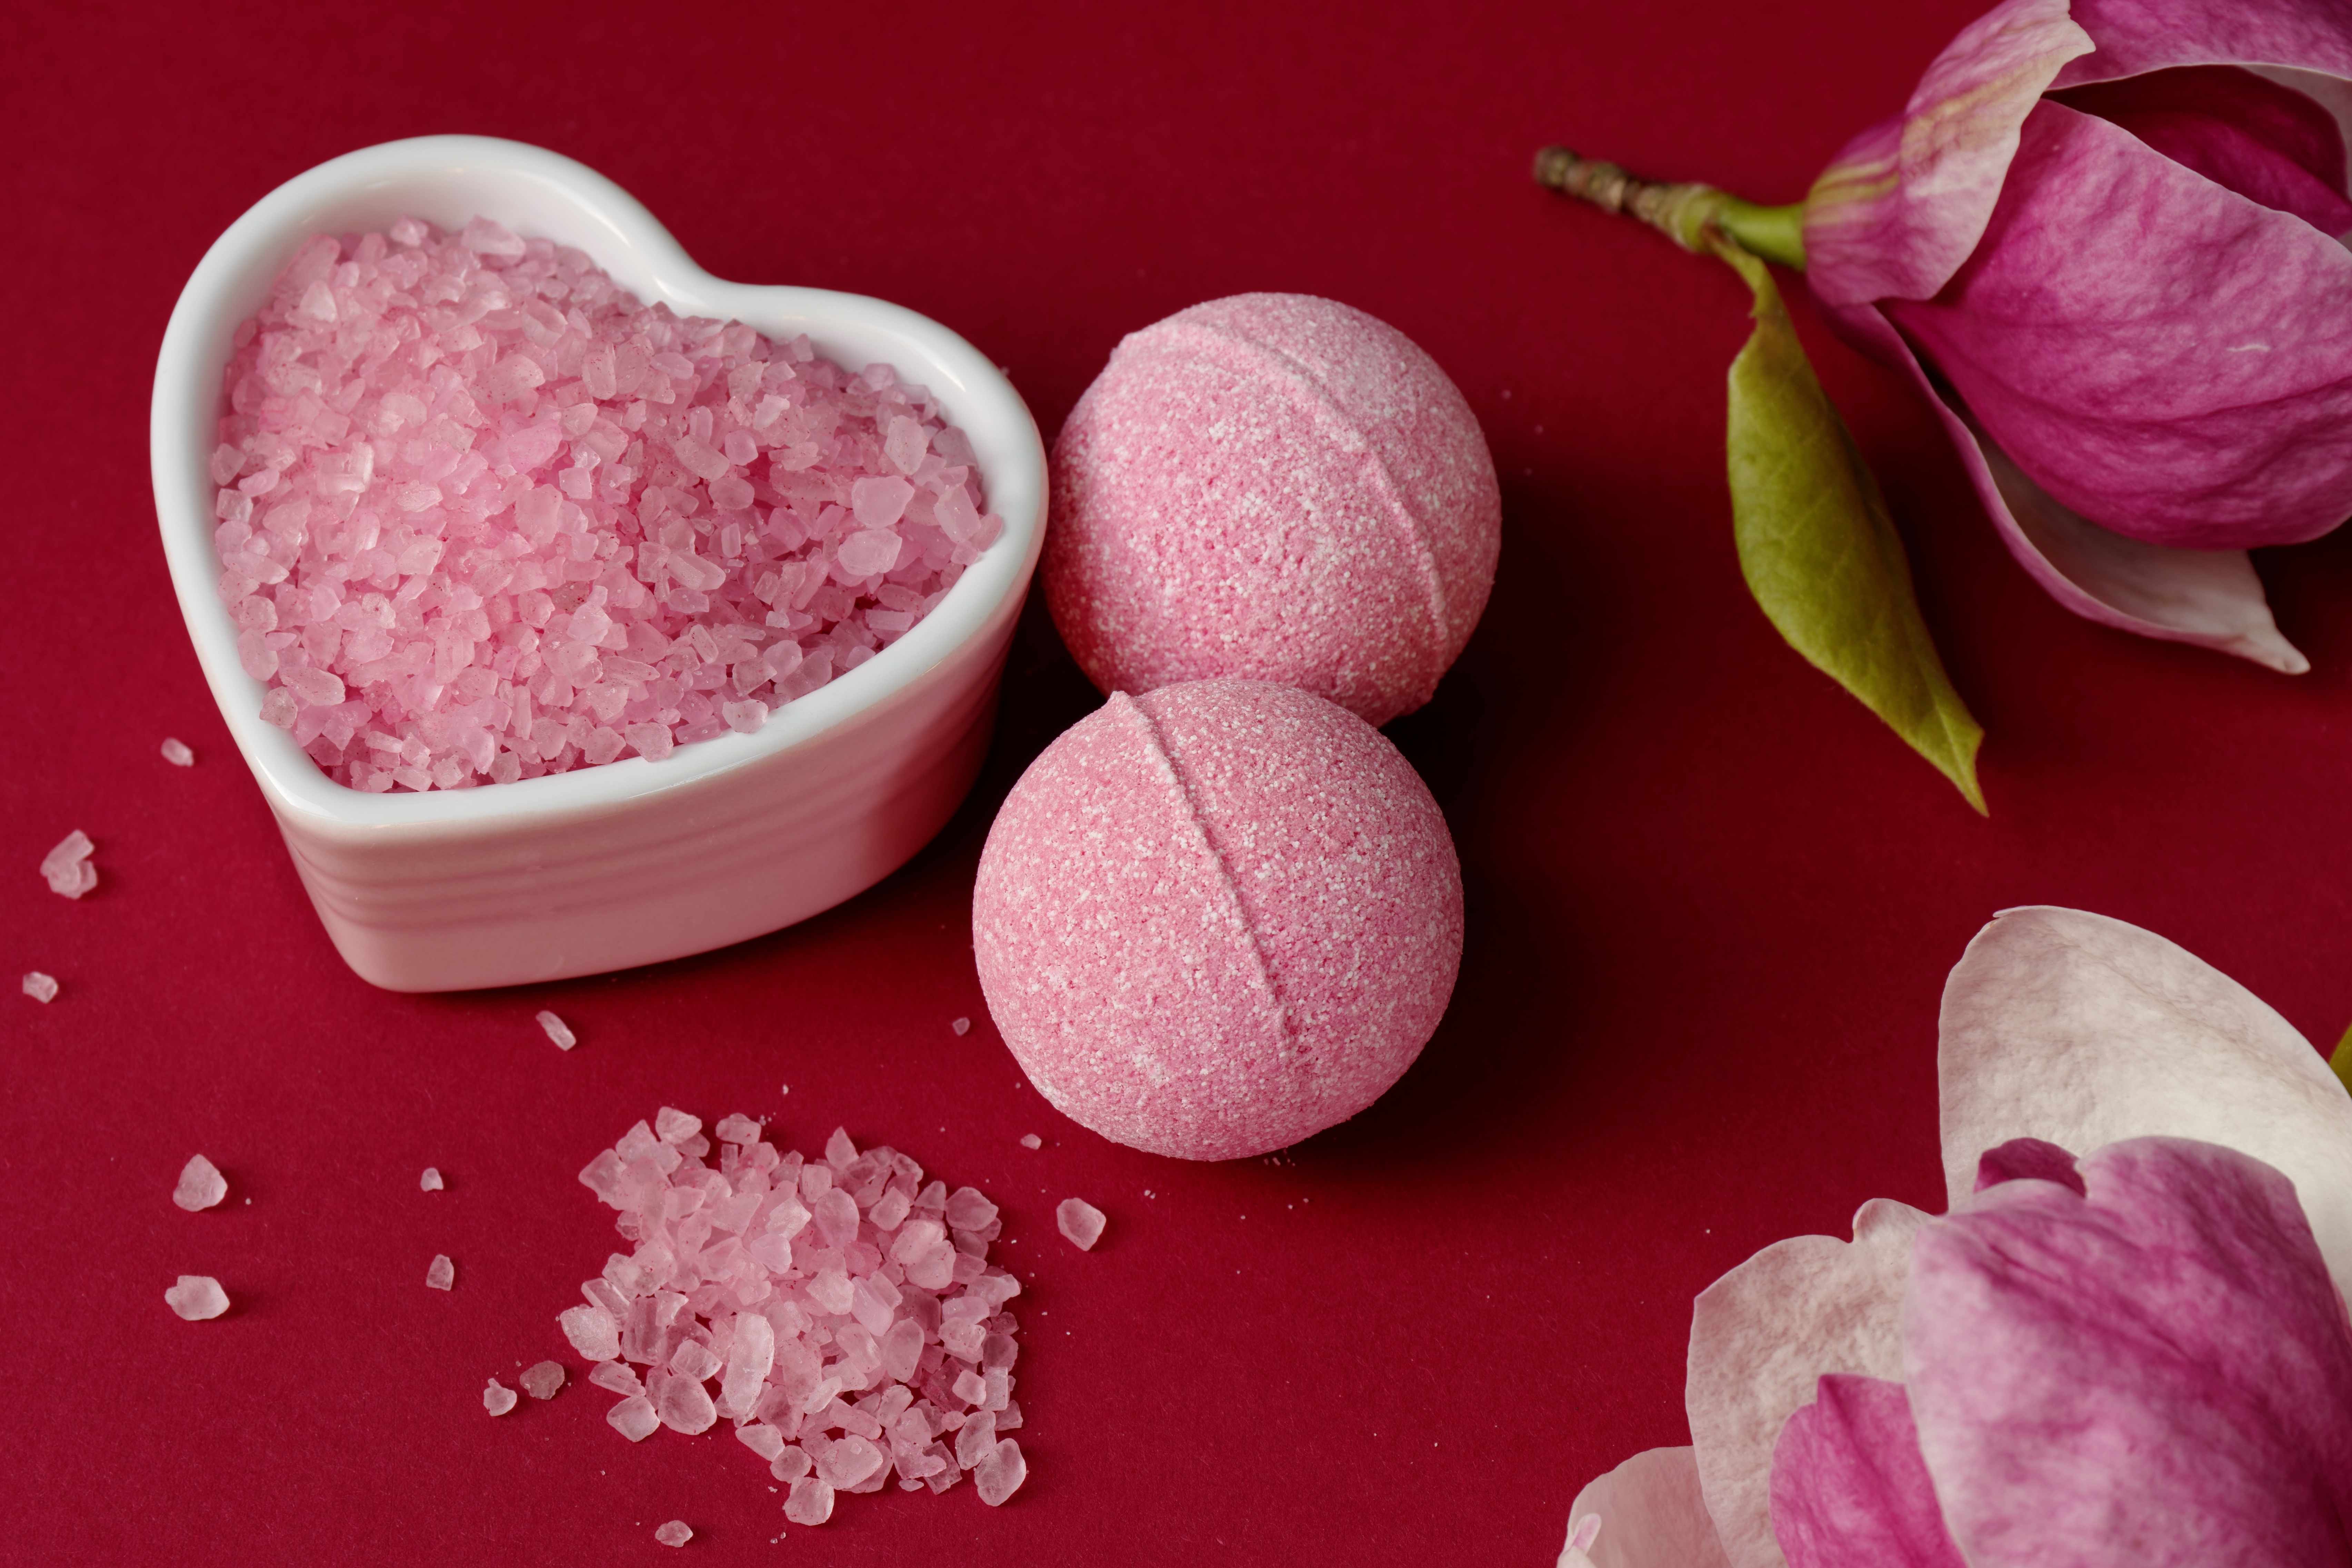 Pink bath bombs make romantic self-care gifts for Valentine’s Day.